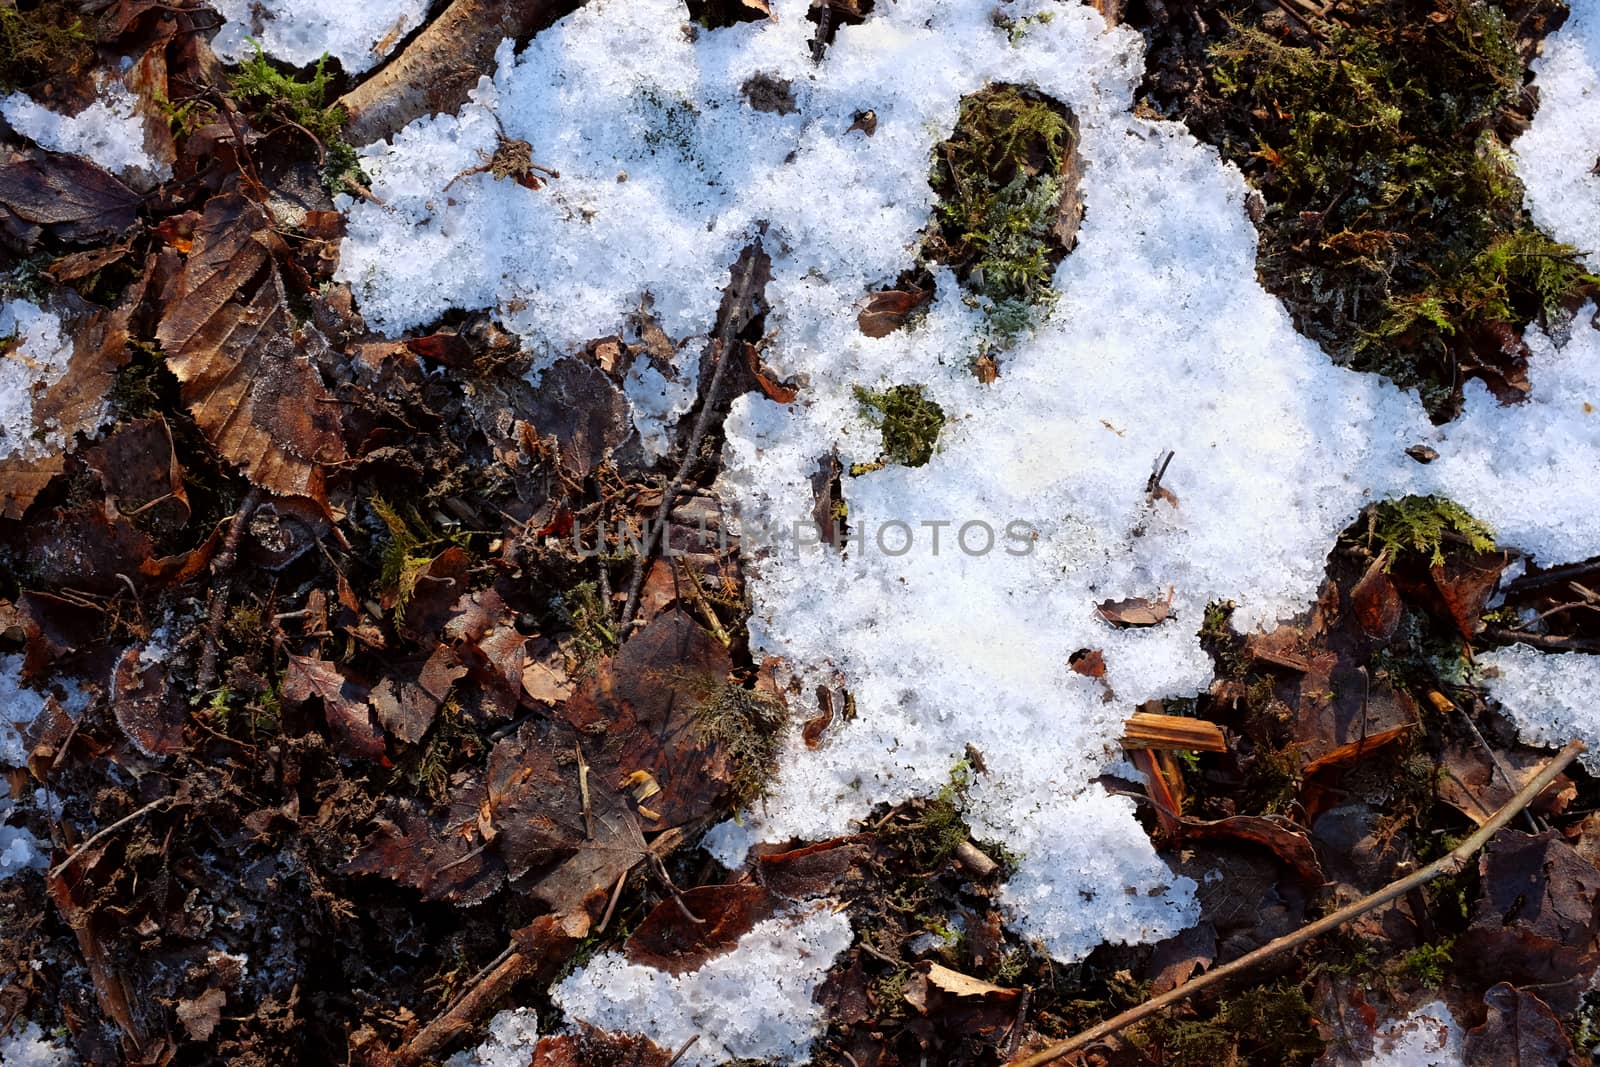 Abstract background of melting snow and ice on a woodland floor covered with dead leaves and green moss